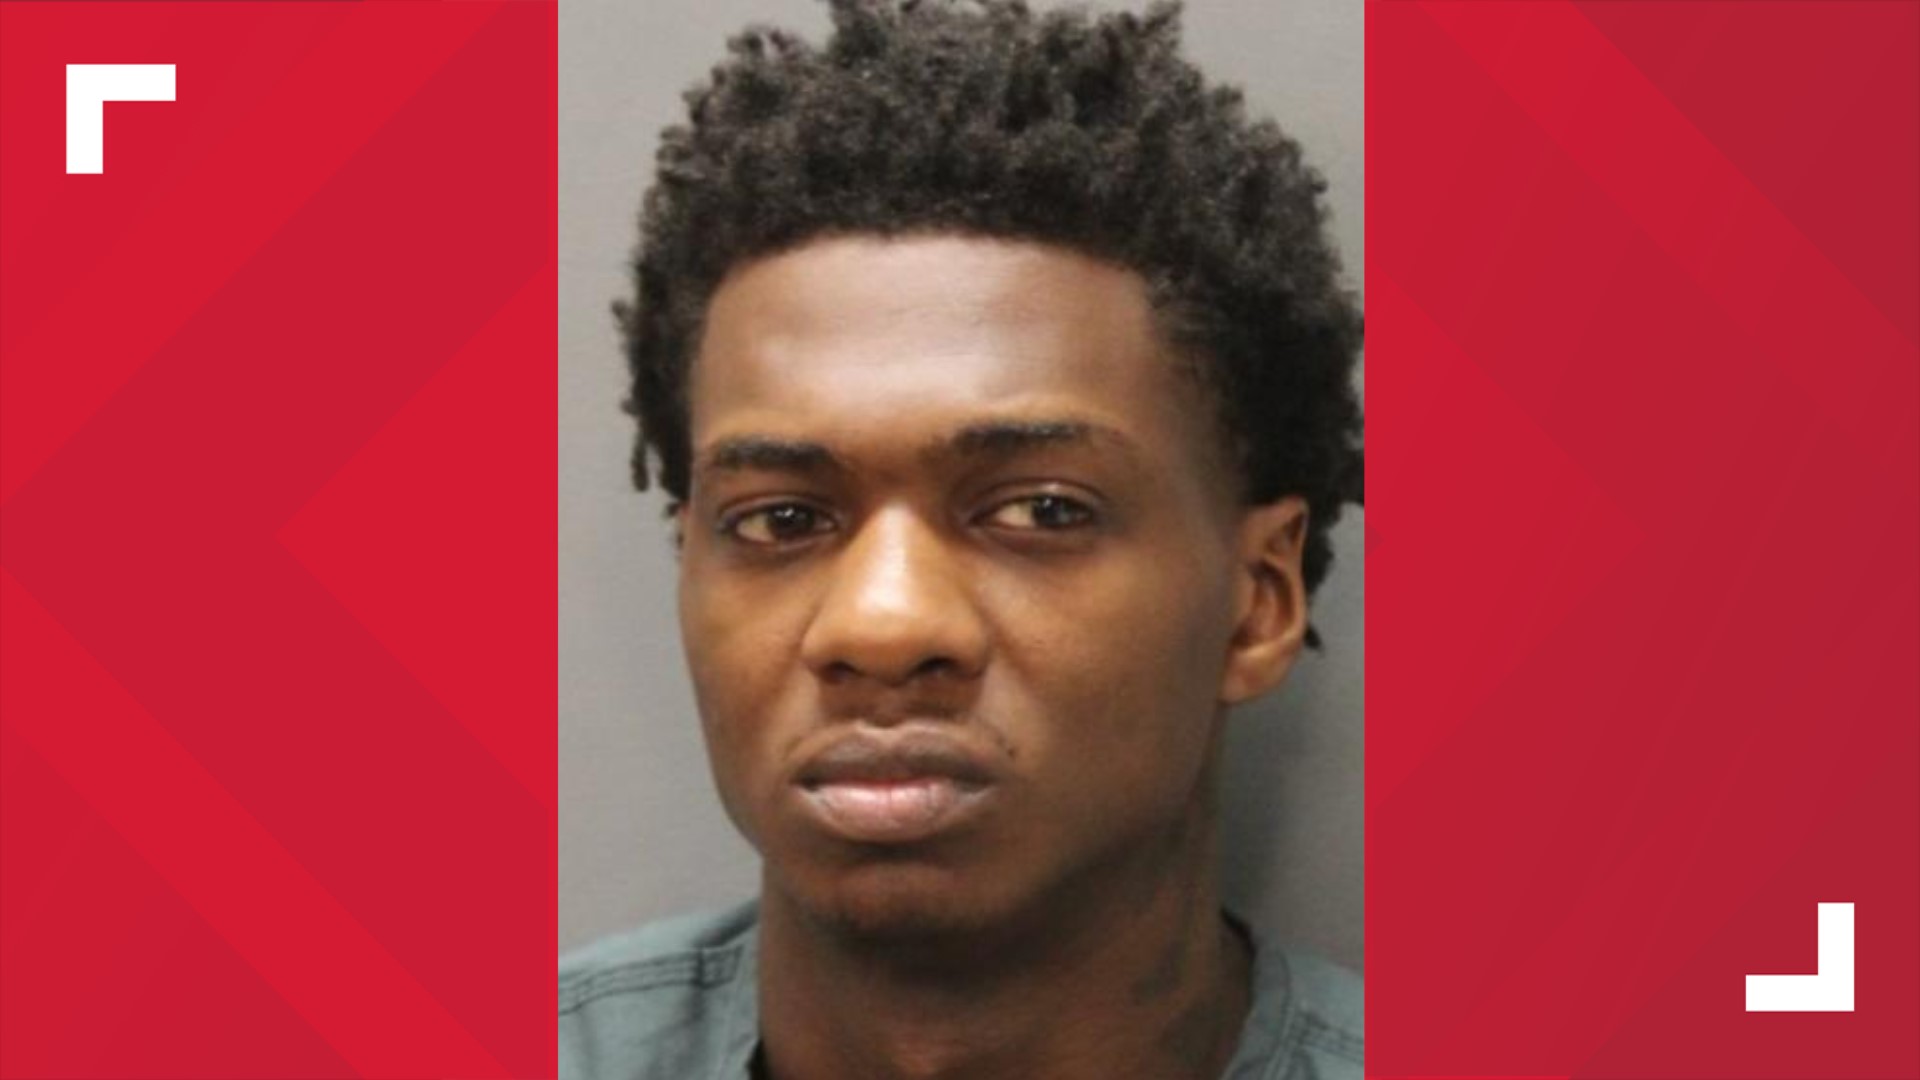 The rapper, whose real name is Noah Williams, was sentenced Friday in Duval County court after pleading guilty May 24 to tampering charges.